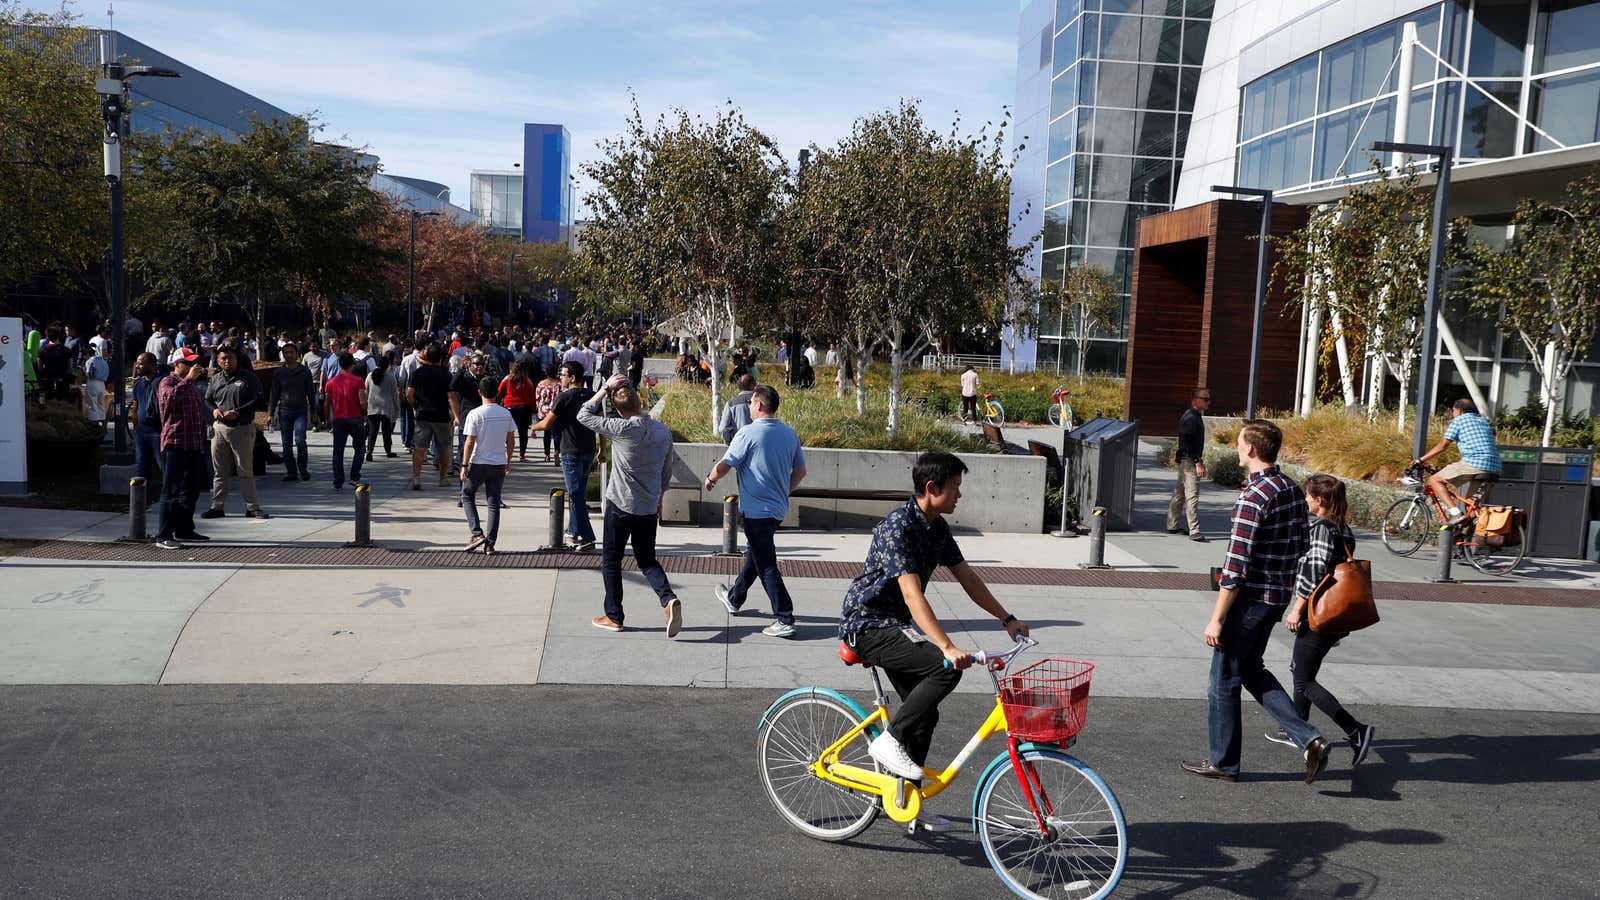 The Googleplex has fun colored bikes and a dismal caste system.